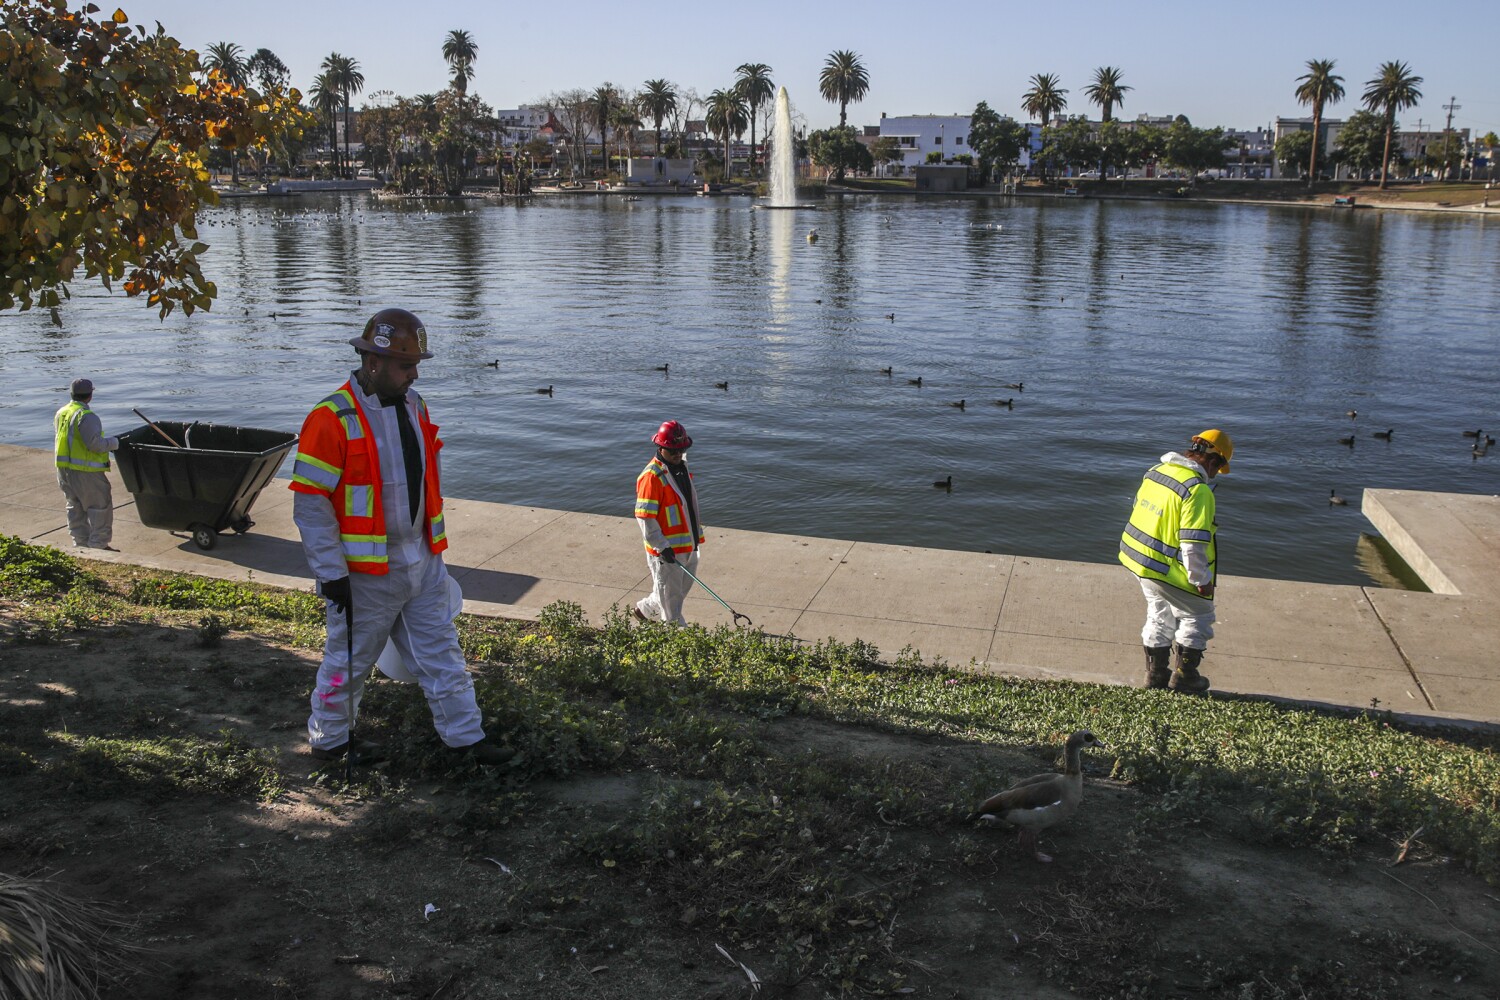 MacArthur Park reopens after months-long closure for cleanup and renovations